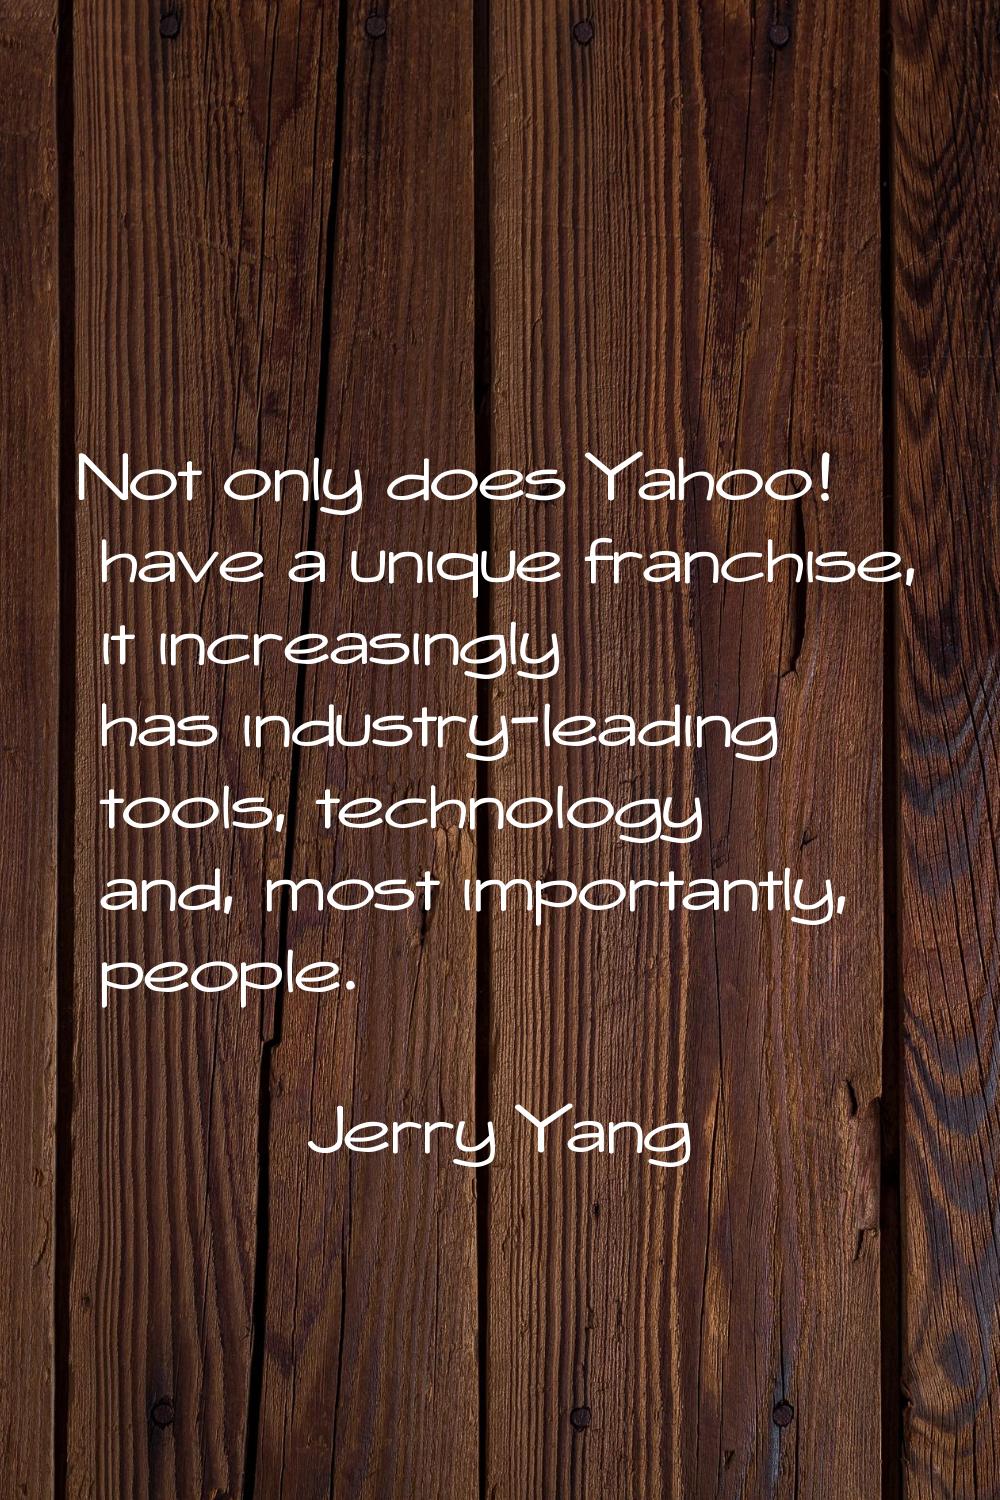 Not only does Yahoo! have a unique franchise, it increasingly has industry-leading tools, technolog